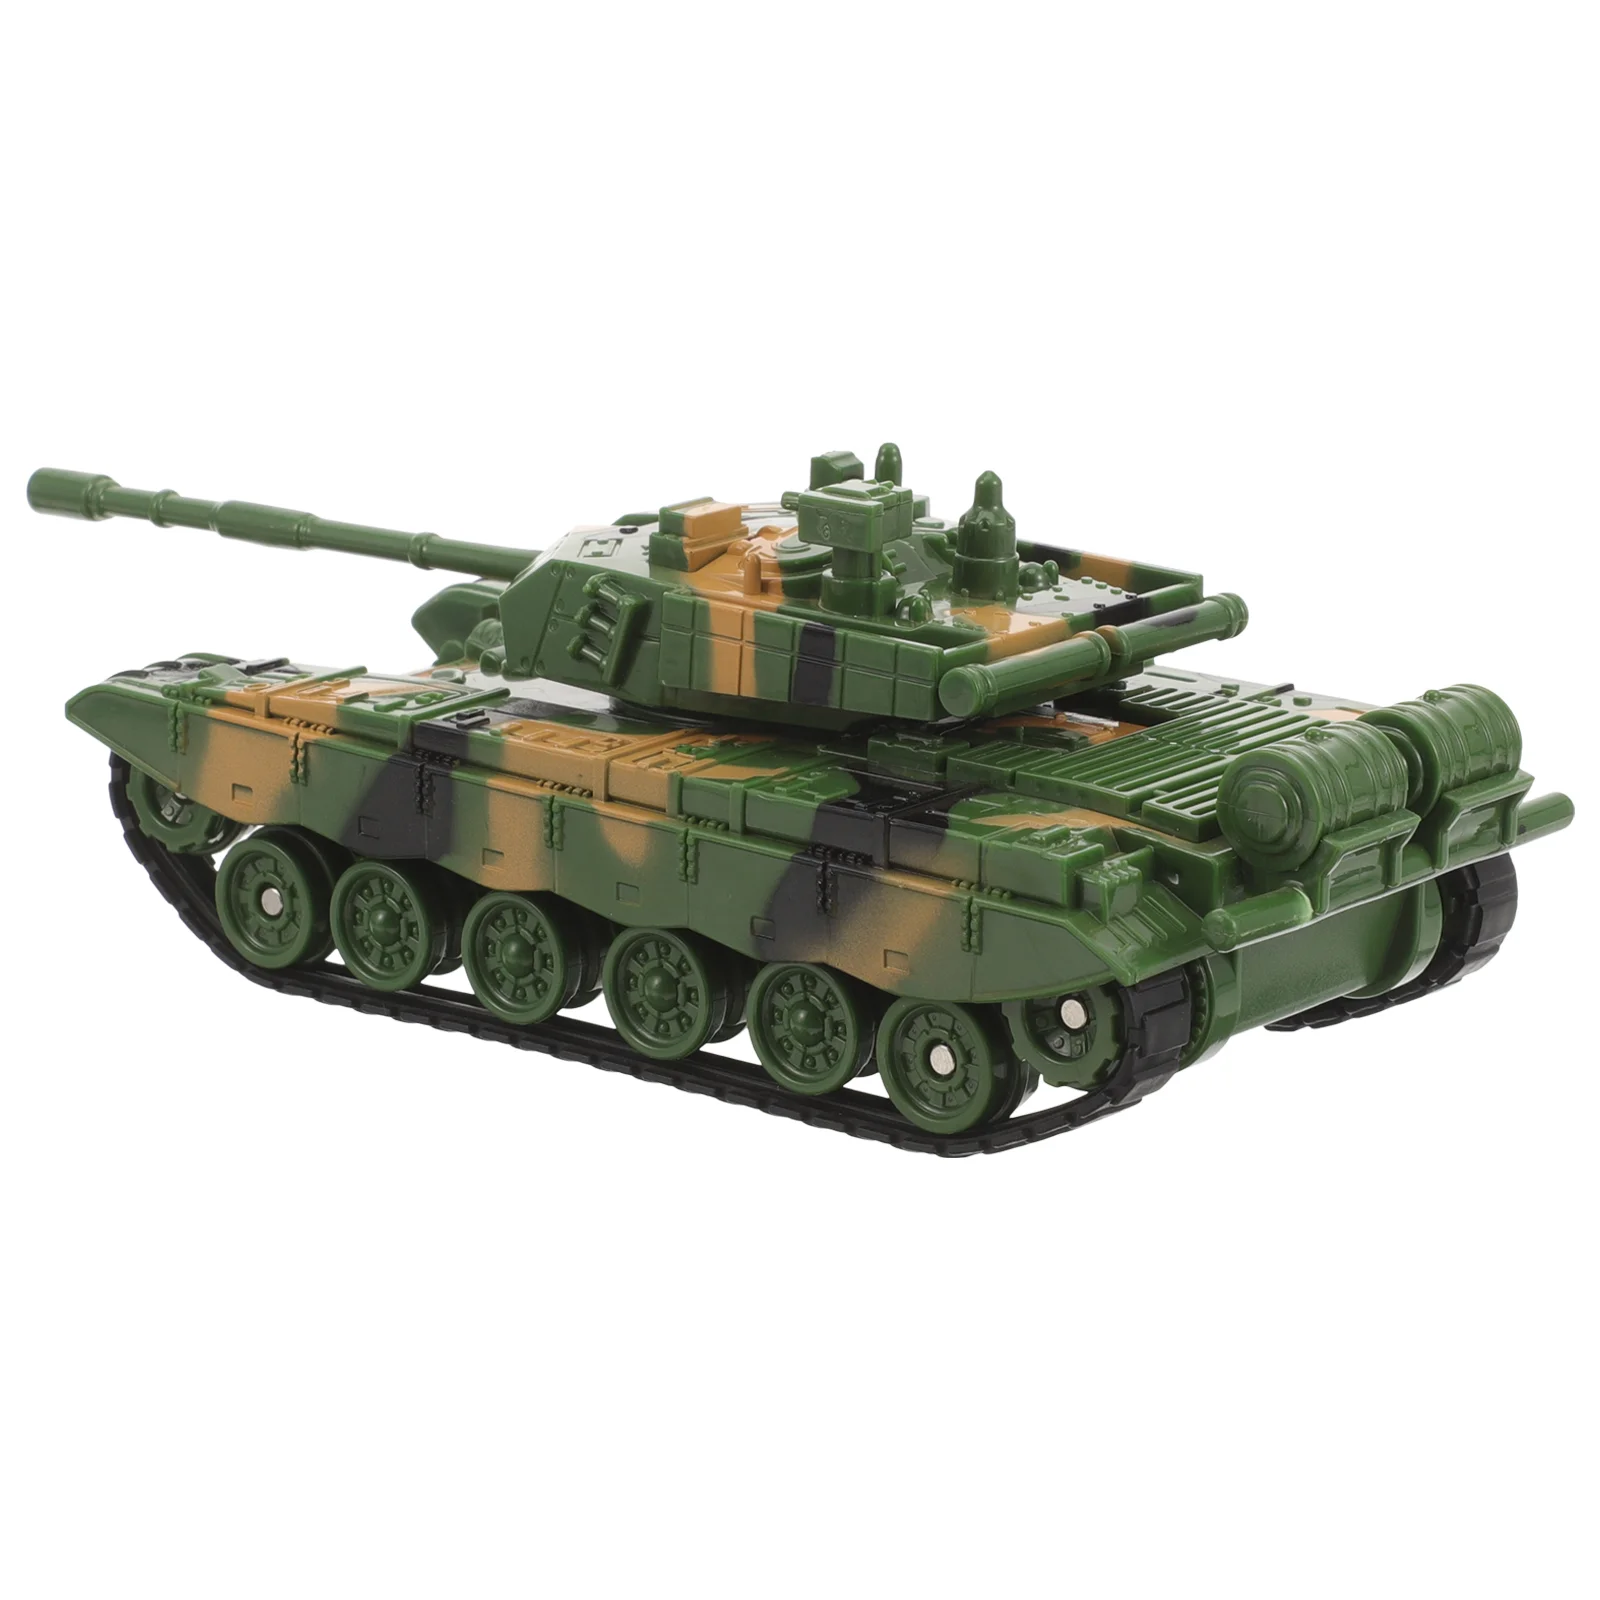 

Tank with Rotating Turret Tank Model Vehicle for Kids Boys